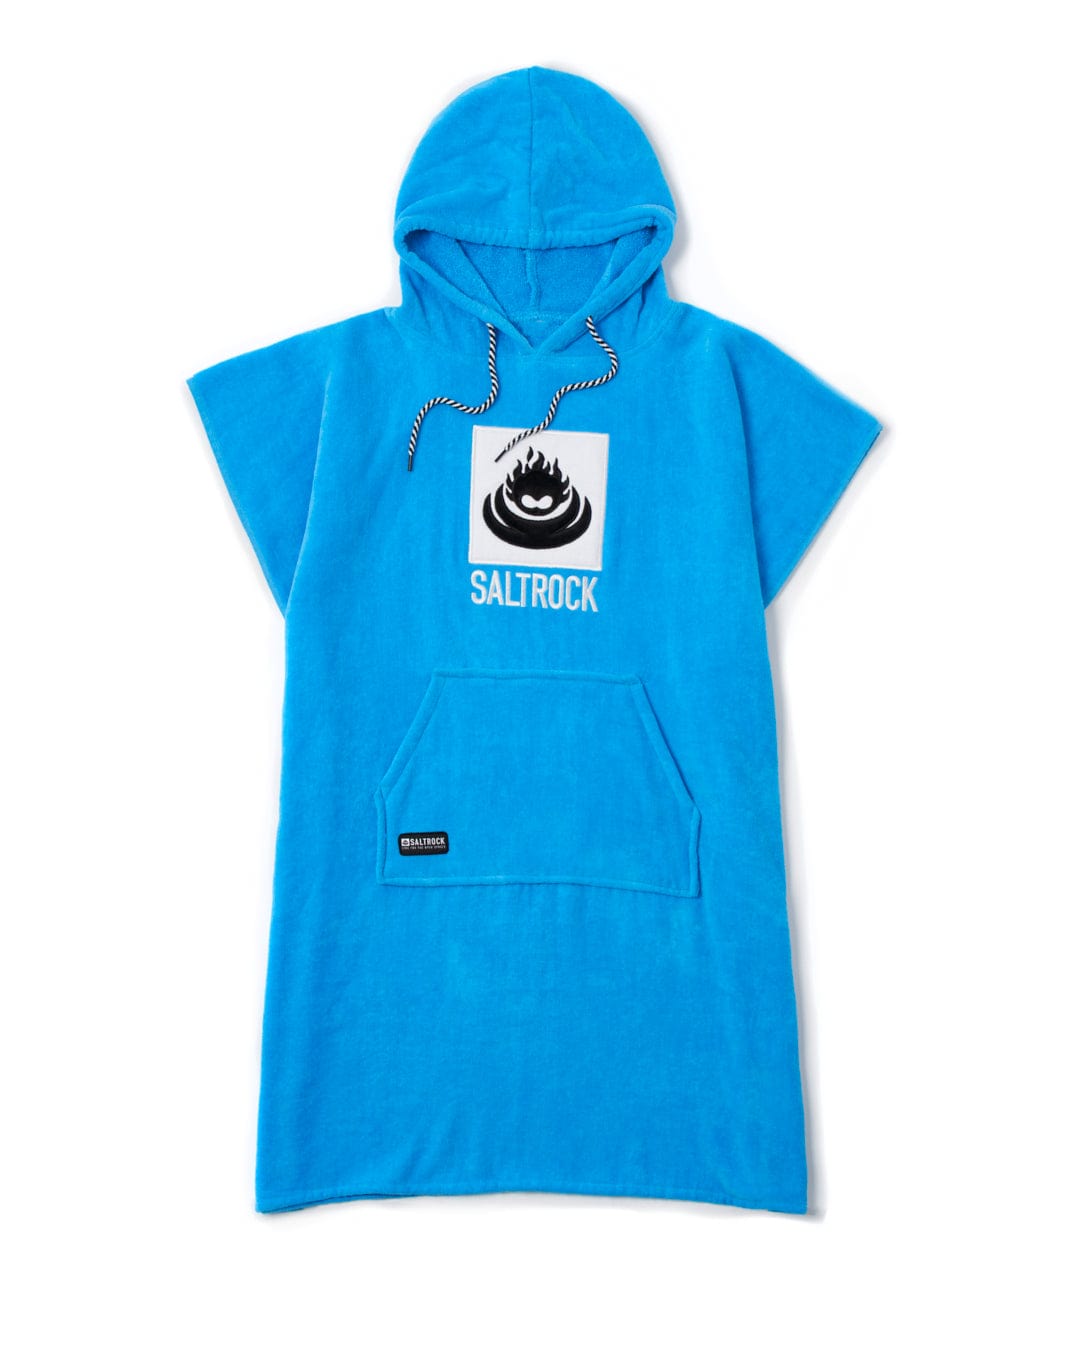 Blue hooded sleeveless top from Saltrock with the 